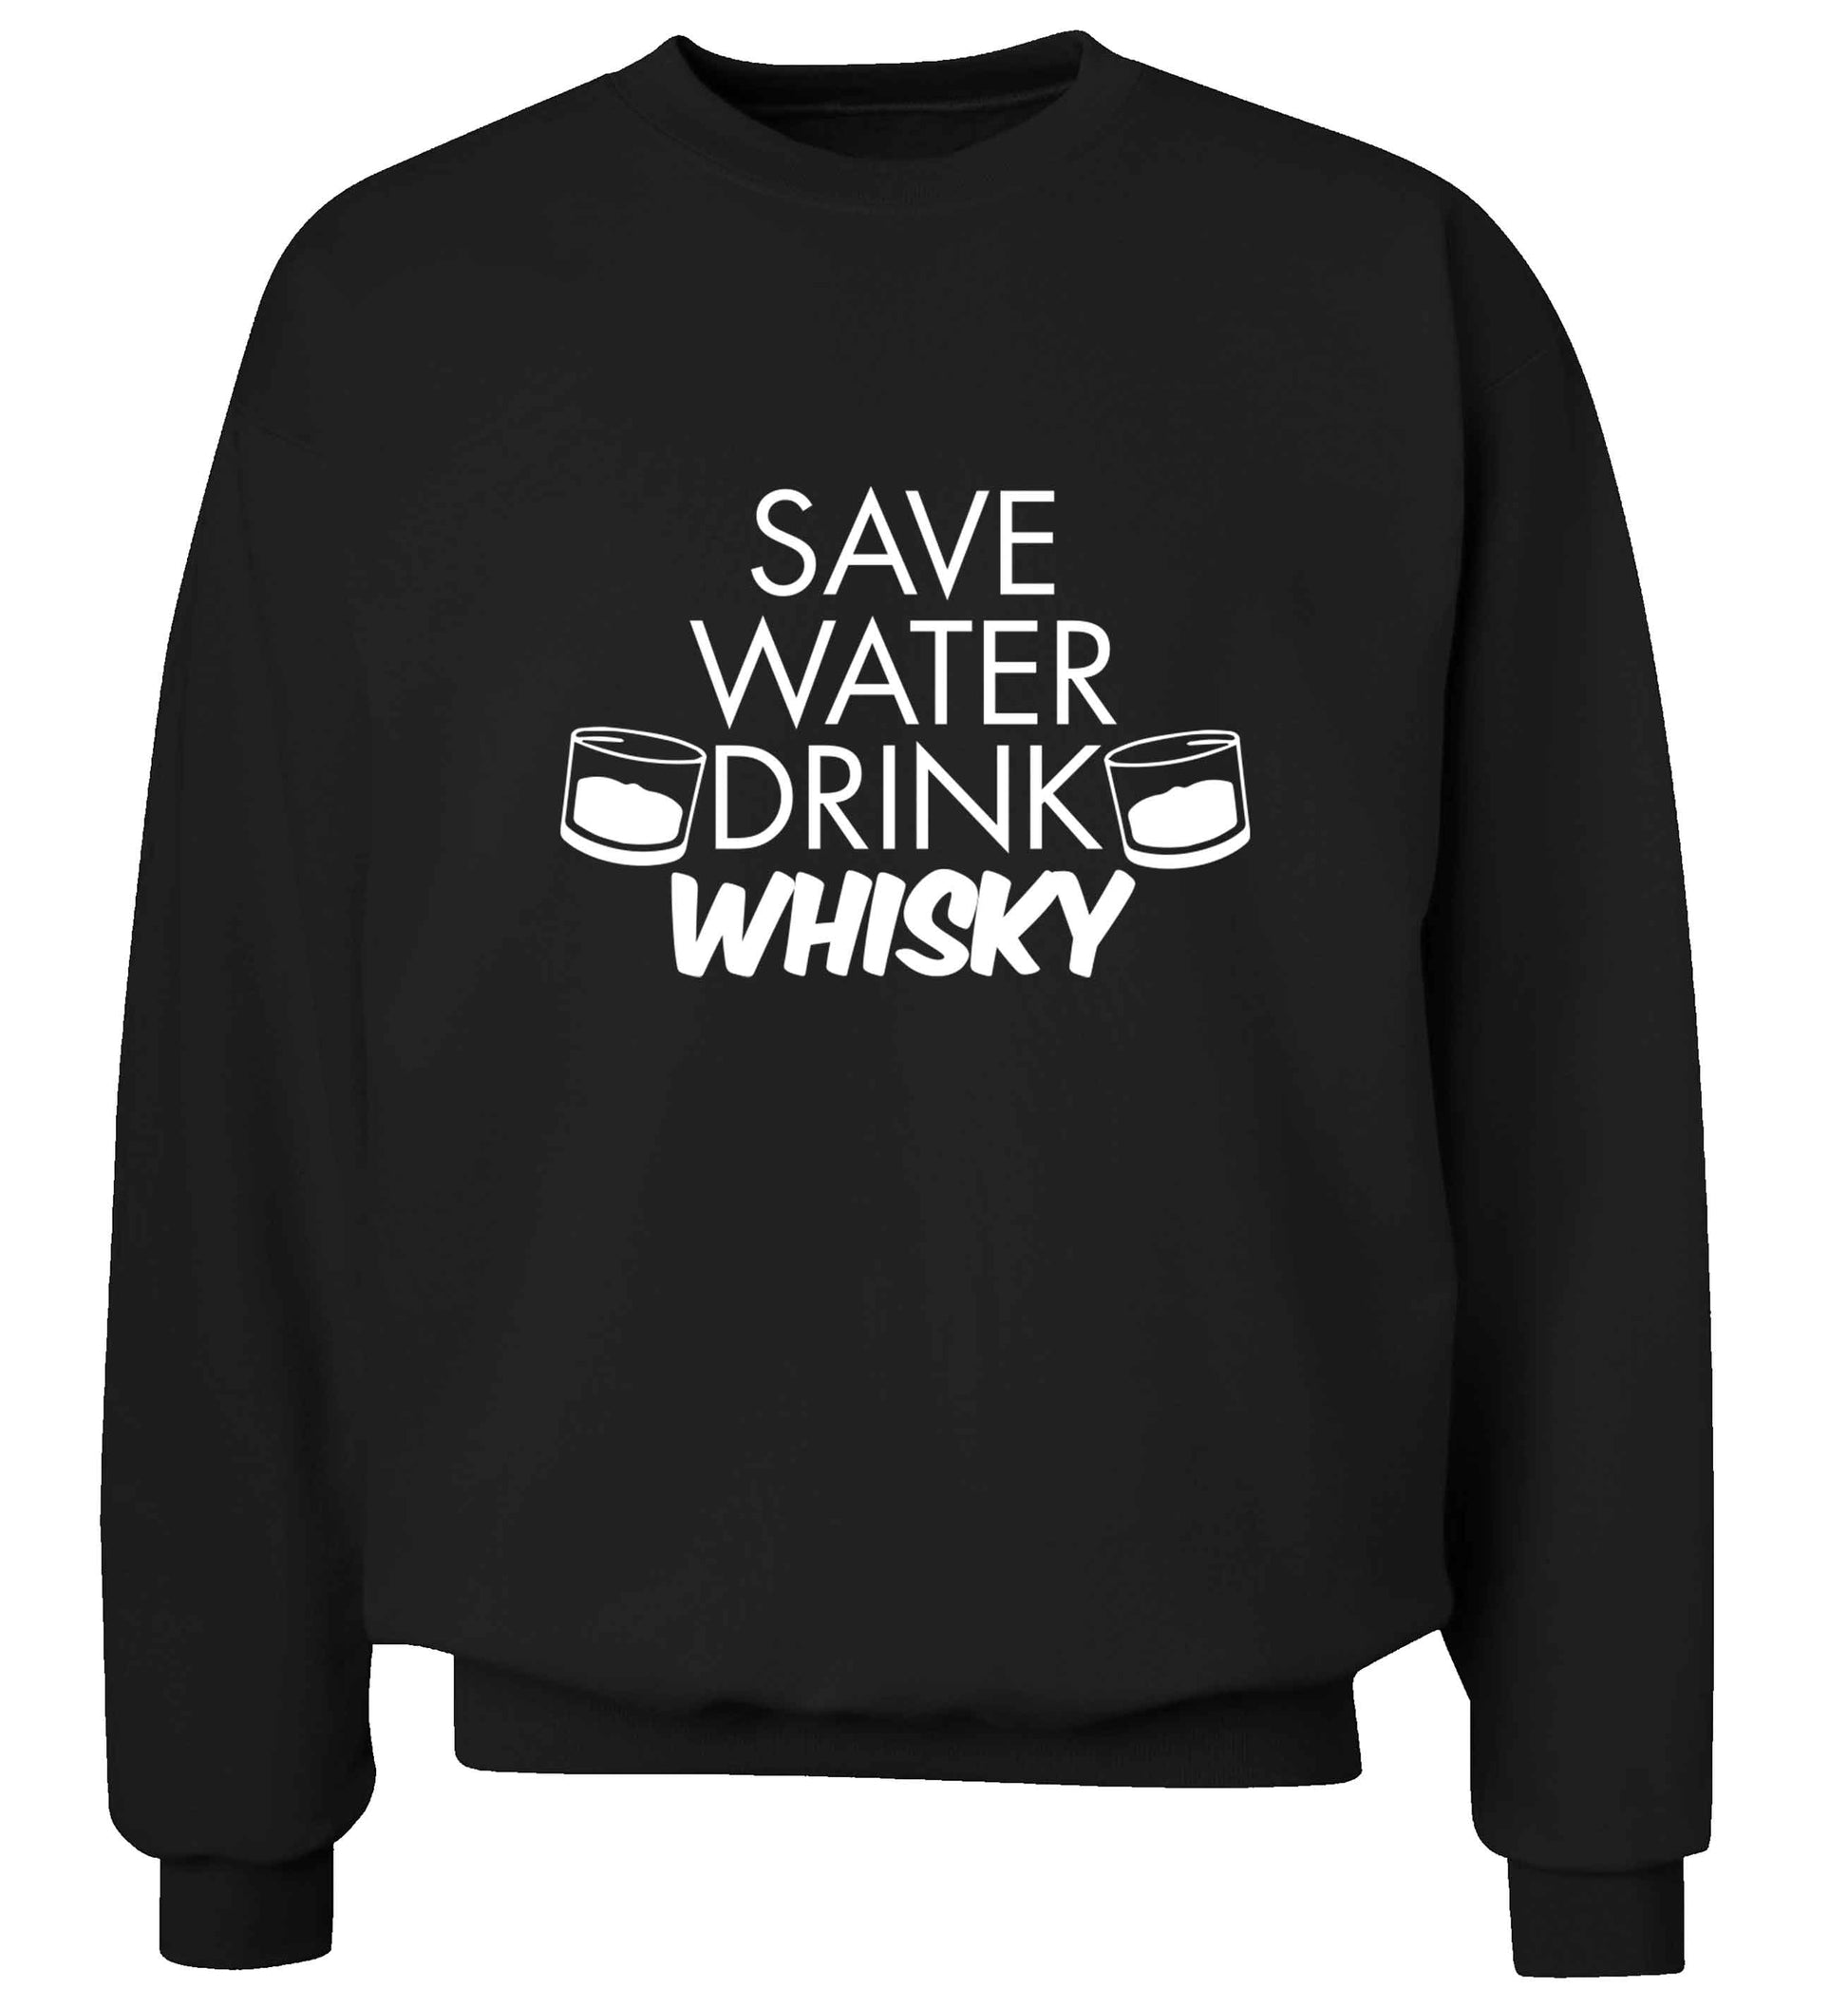 Save water drink whisky adult's unisex black sweater 2XL